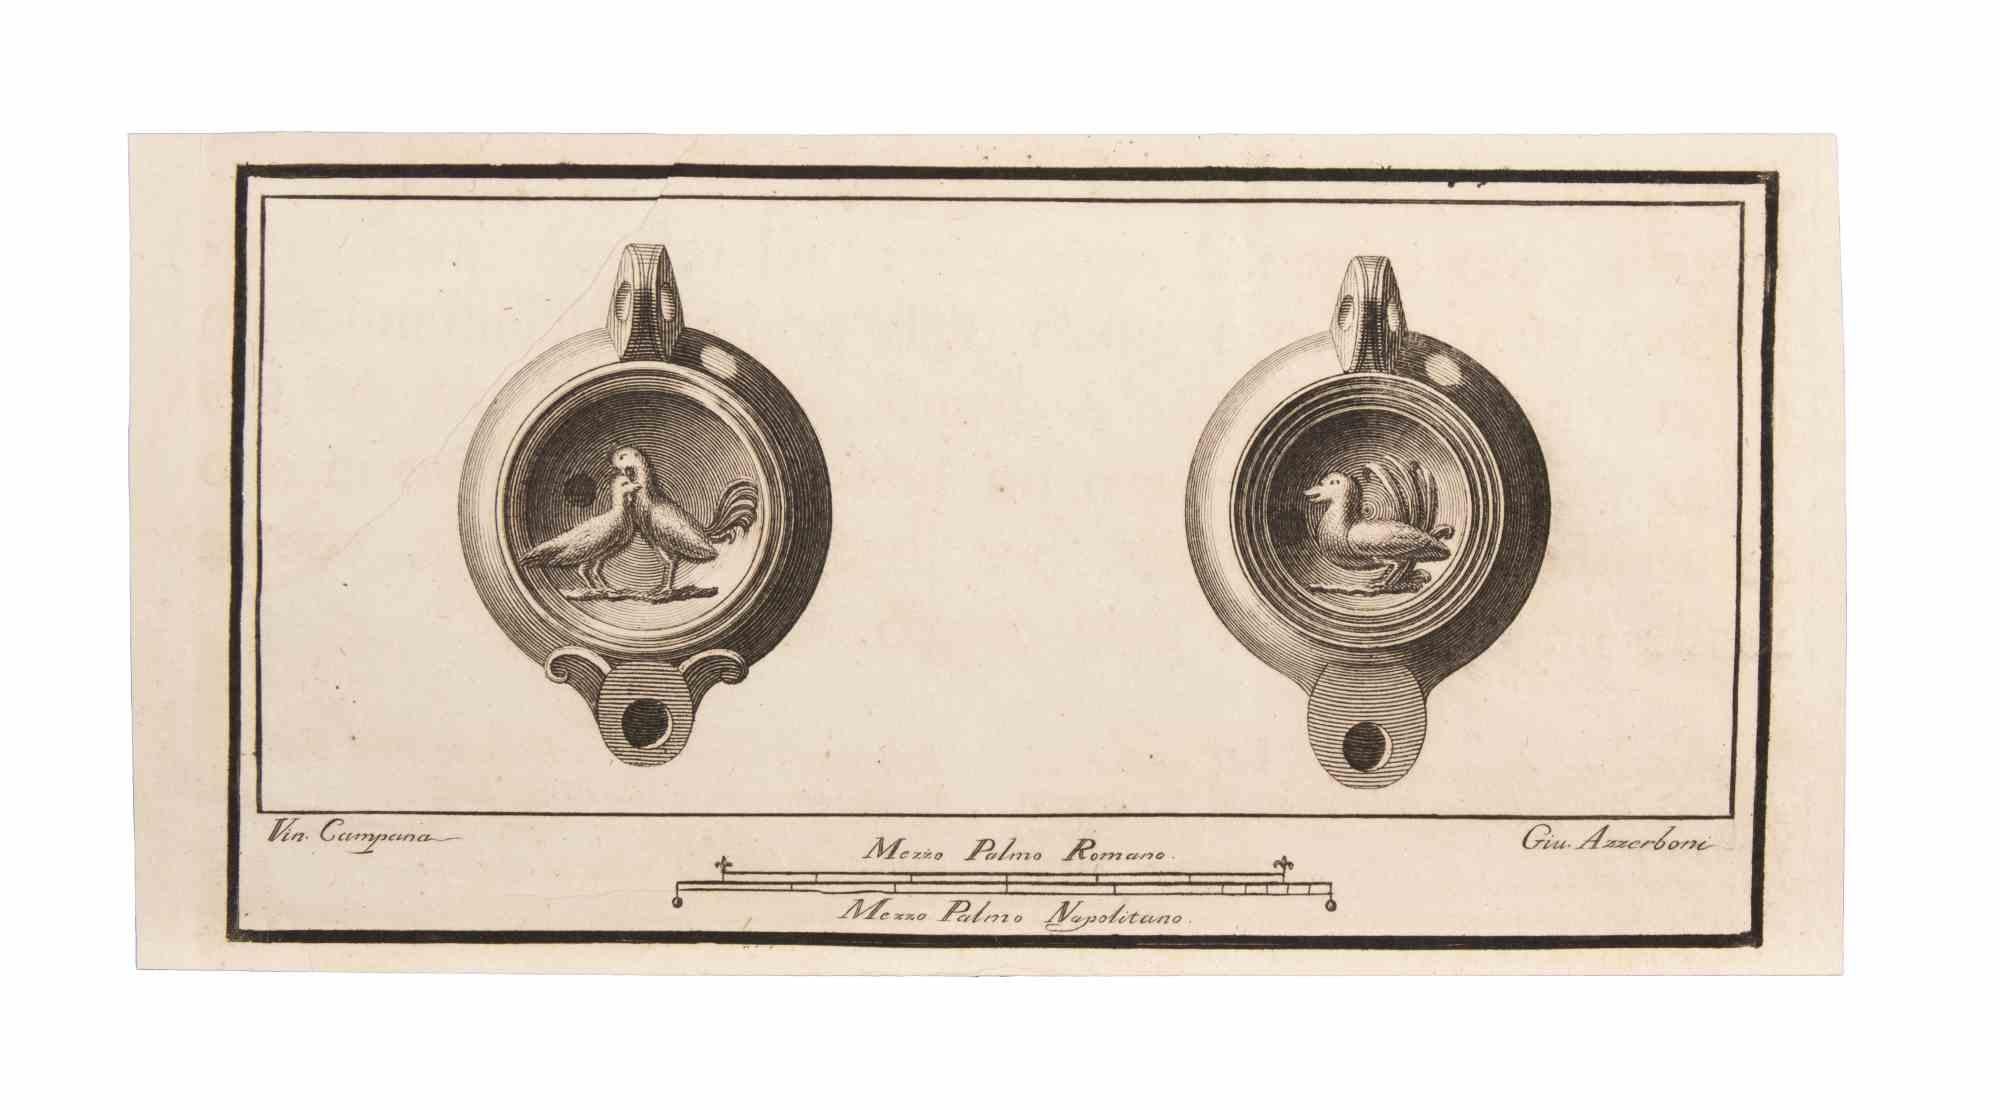 Oil Lamp With Decoration is an Etching realized by Vincenzo Campana (1730-1806).

The etching belongs to the print suite “Antiquities of Herculaneum Exposed” (original title: “Le Antichità di Ercolano Esposte”), an eight-volume volume of engravings